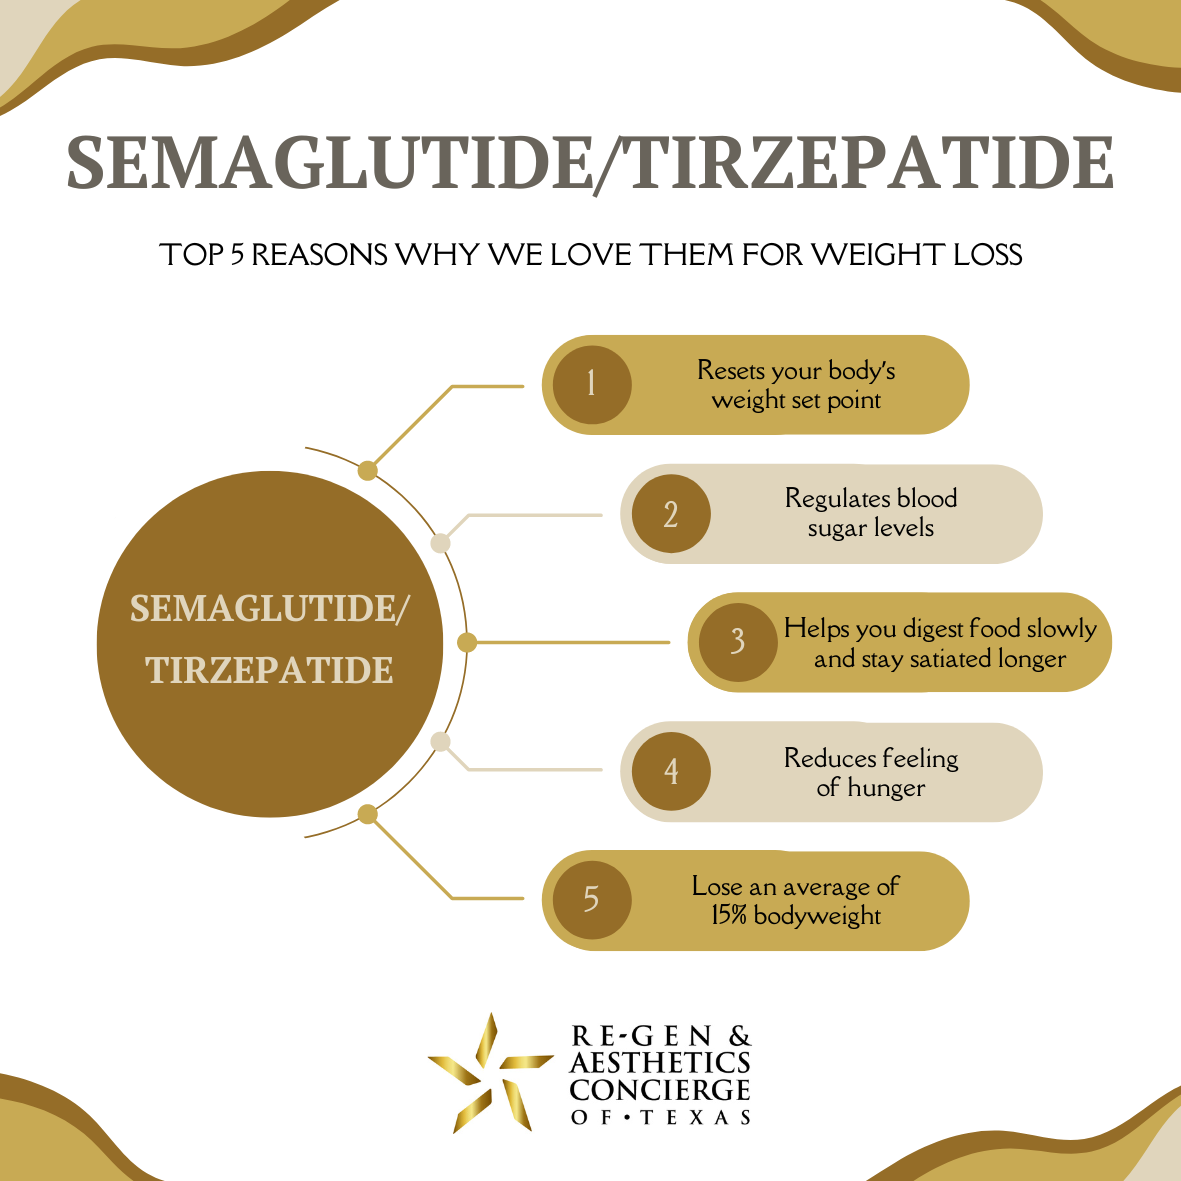 tirzepatide and semaglutide for weightloss